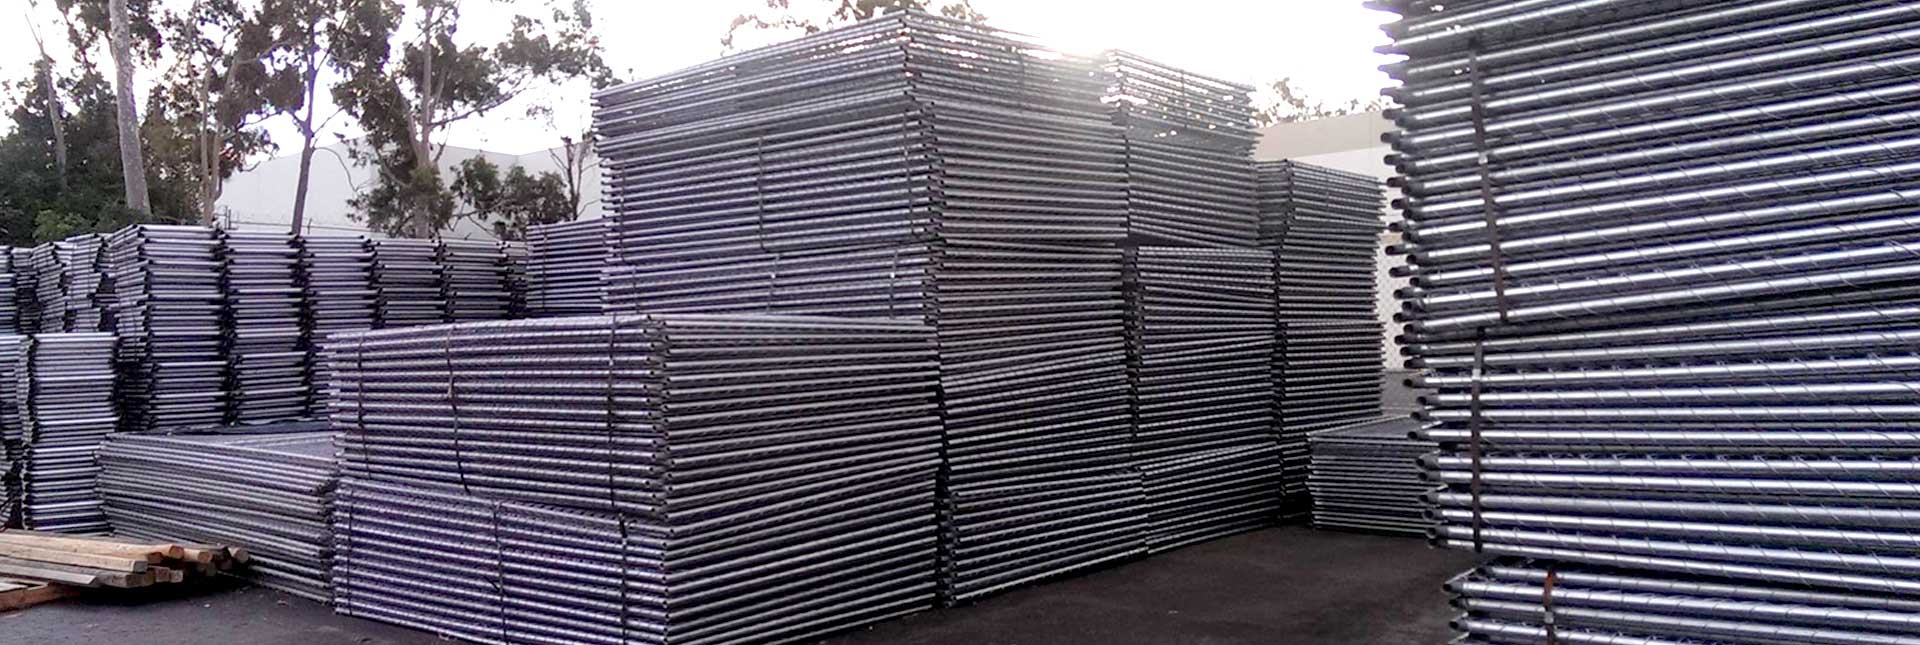 Temporary Fence Panels are stacked in semi-high piles and delievered to an event or construction site by a large truck.